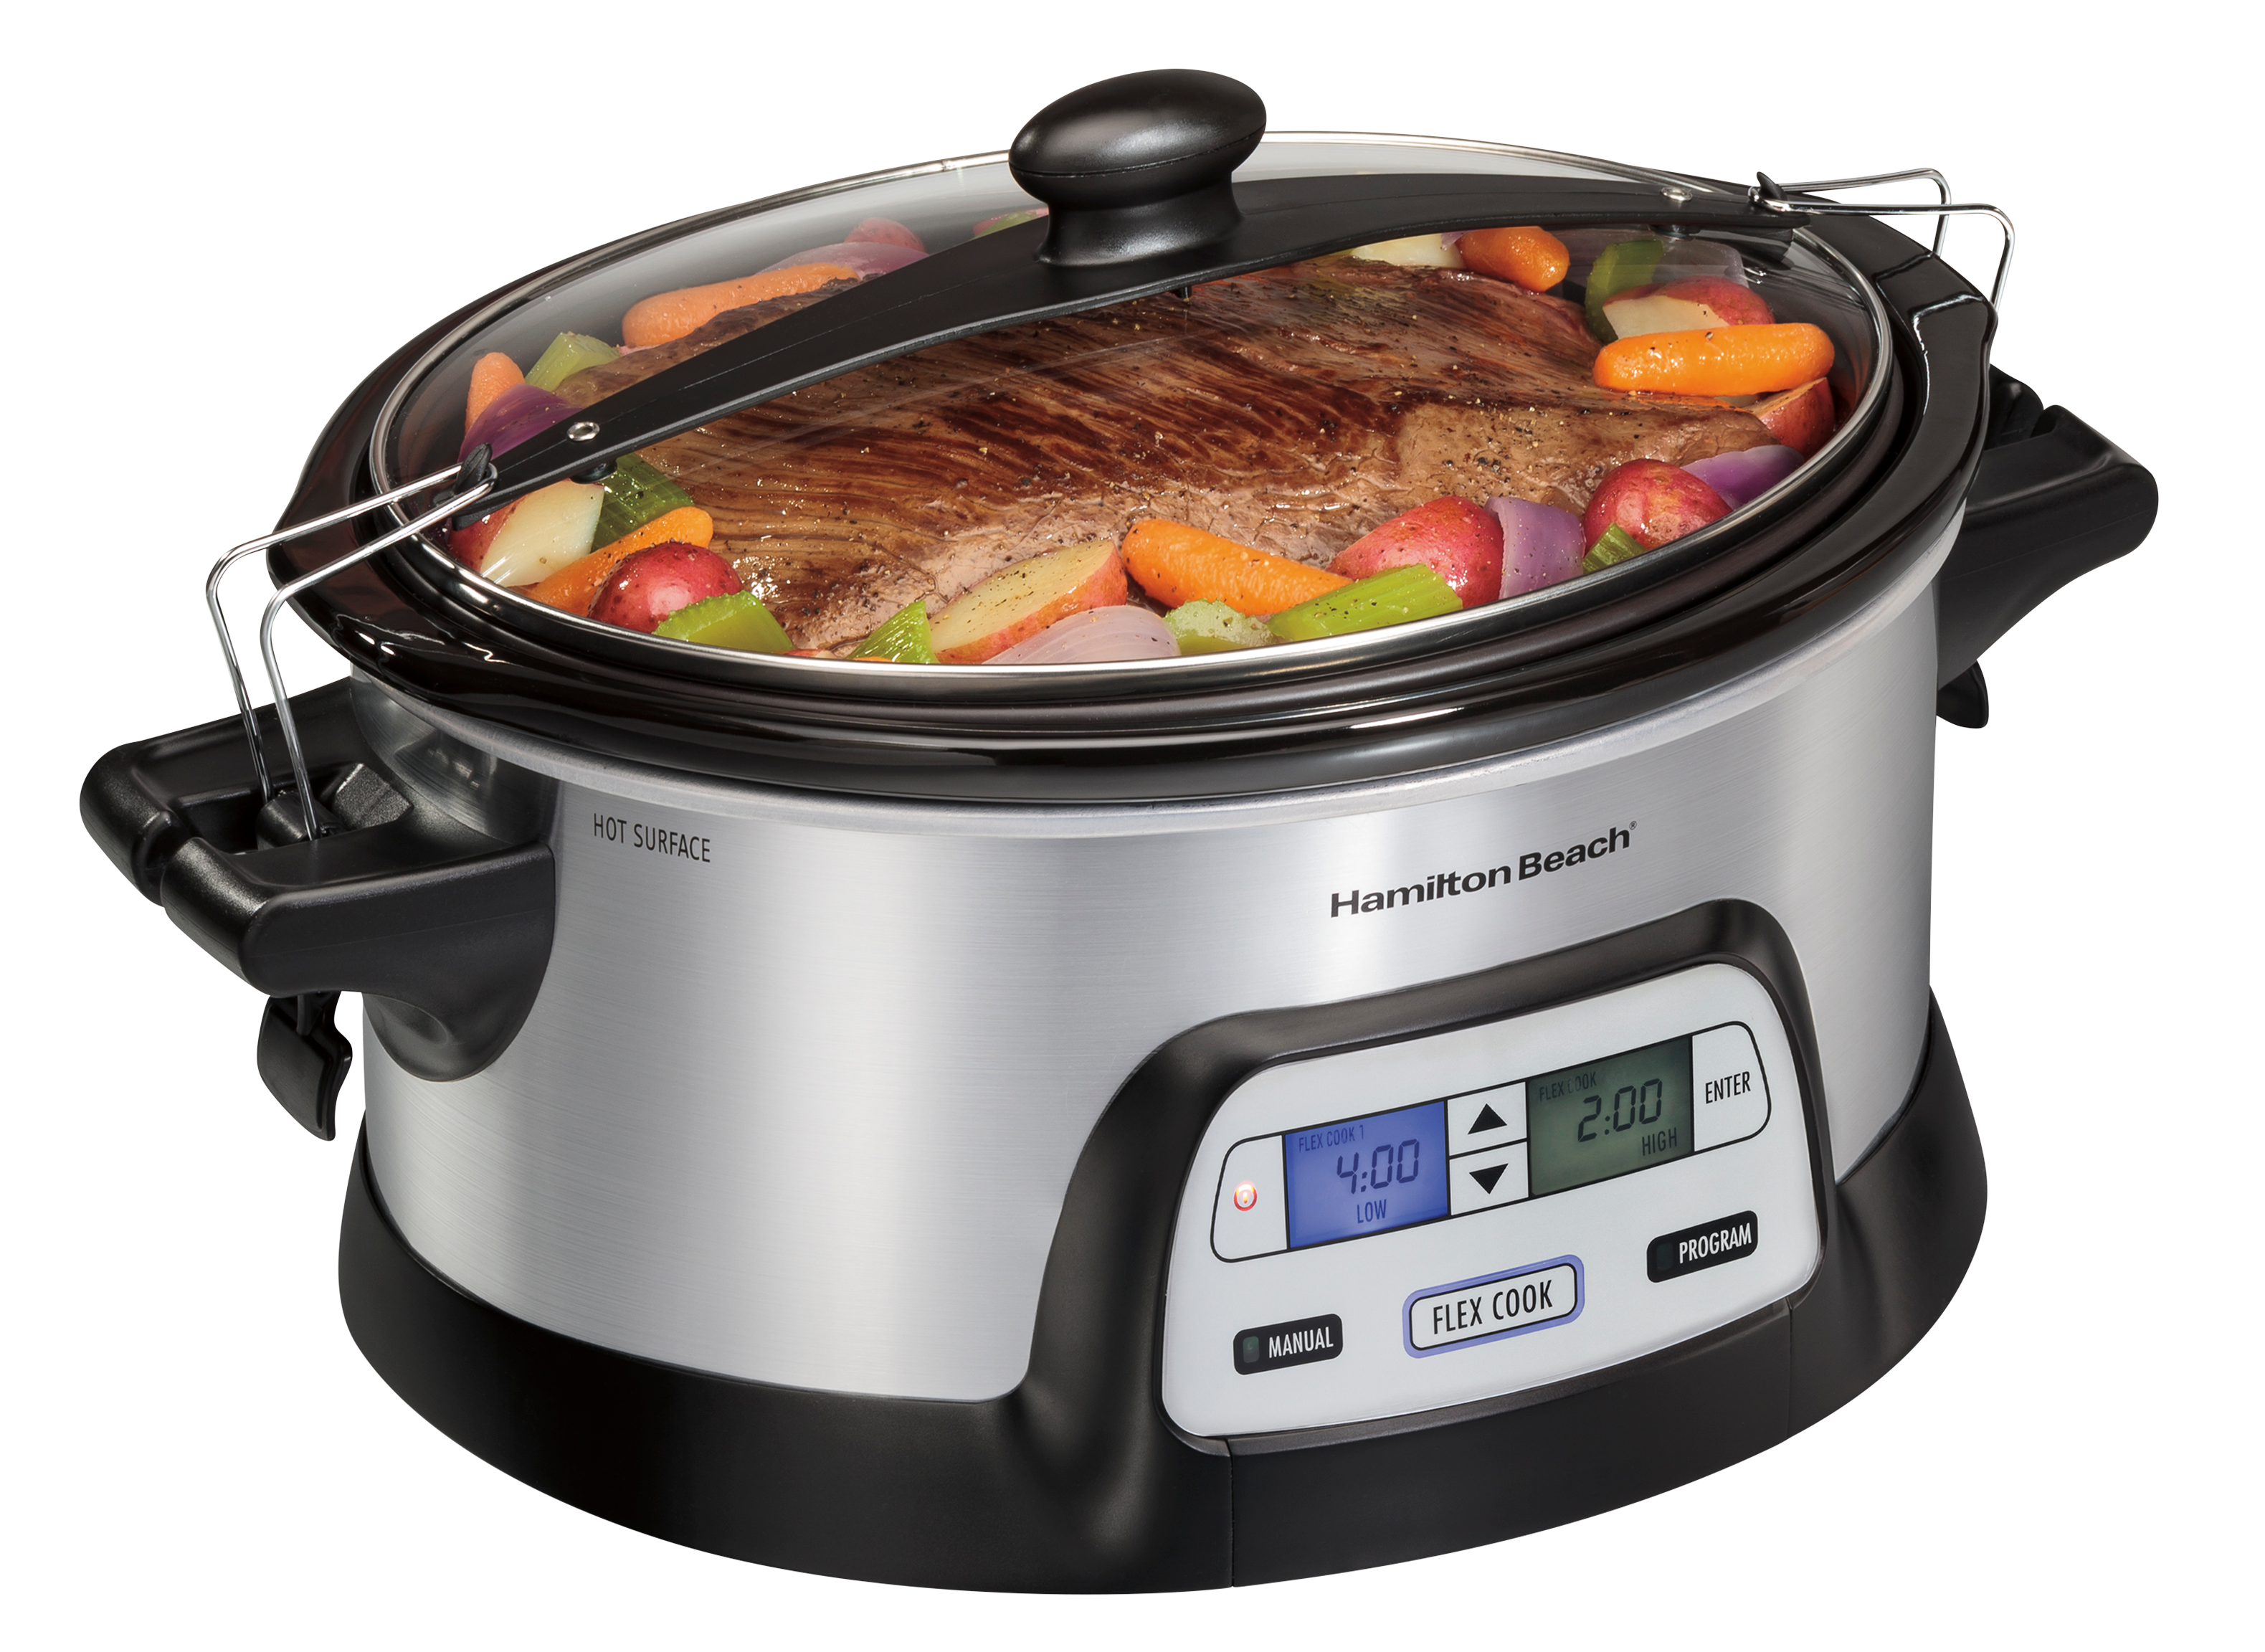 https://crdms.images.consumerreports.org/prod/products/cr/models/397137-slow-cookers-hamilton-beach-programmable-slow-cooker-6-quart-dual-digital-timer-stainless-steel-33861-10000996.png